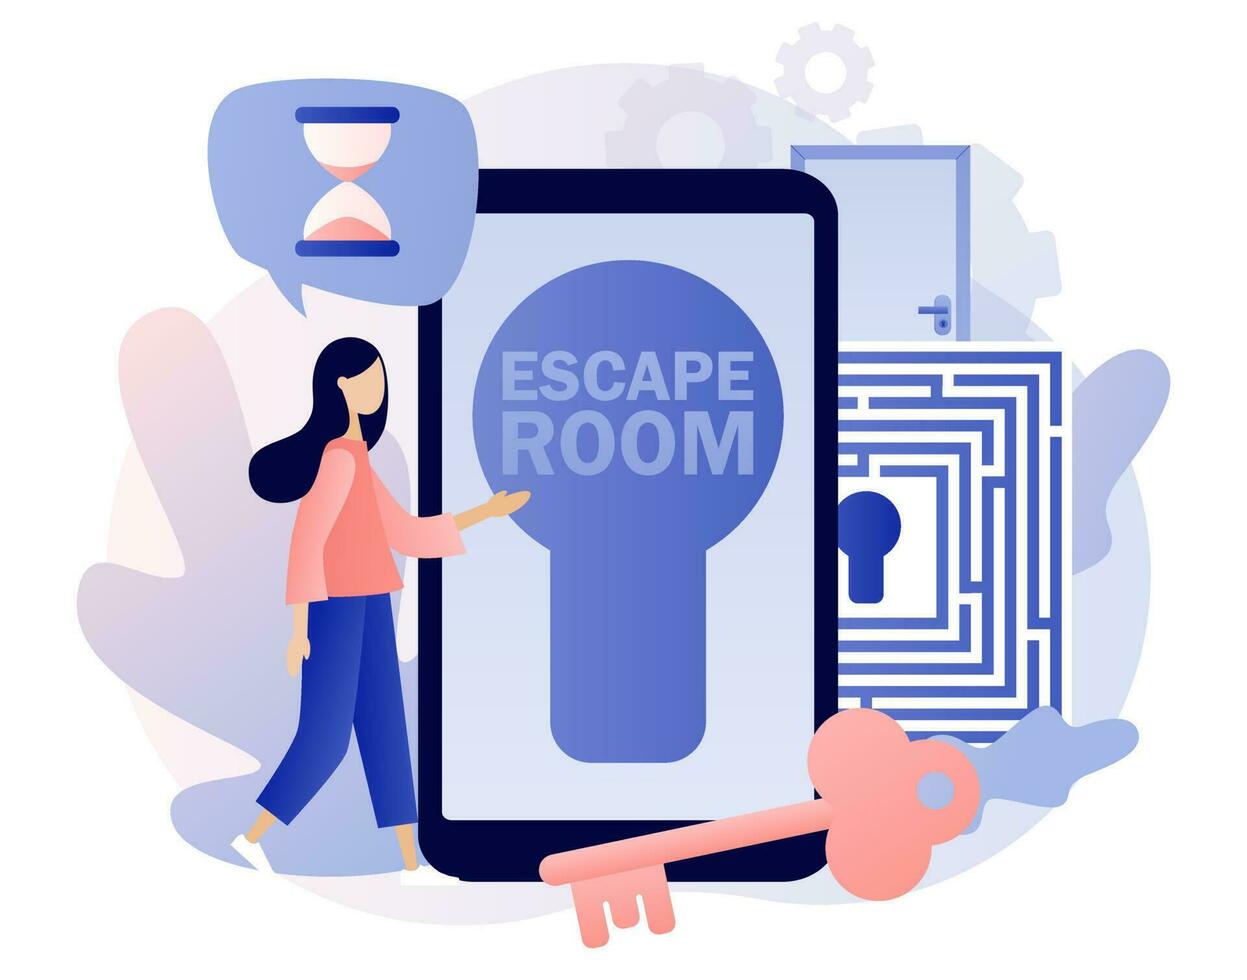 Escape room smartphone app. Quest room. Tiny people trying to solve puzzles, find key, gettout of trap, finding conundrum solution. Exit maze. Modern flat cartoon style. Vector illustration